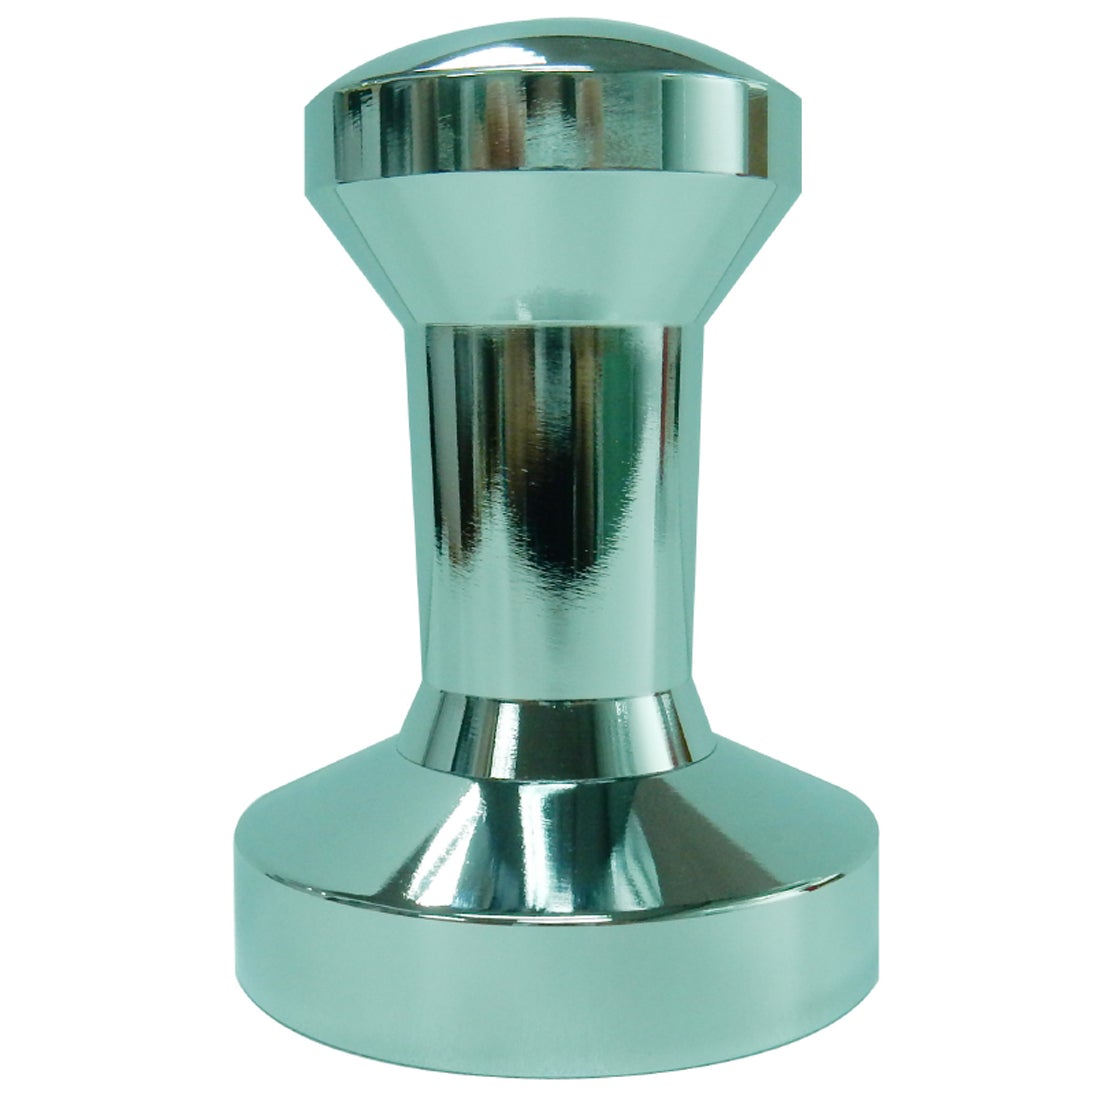 ST-008 Commercial Grade Coffee Tampers